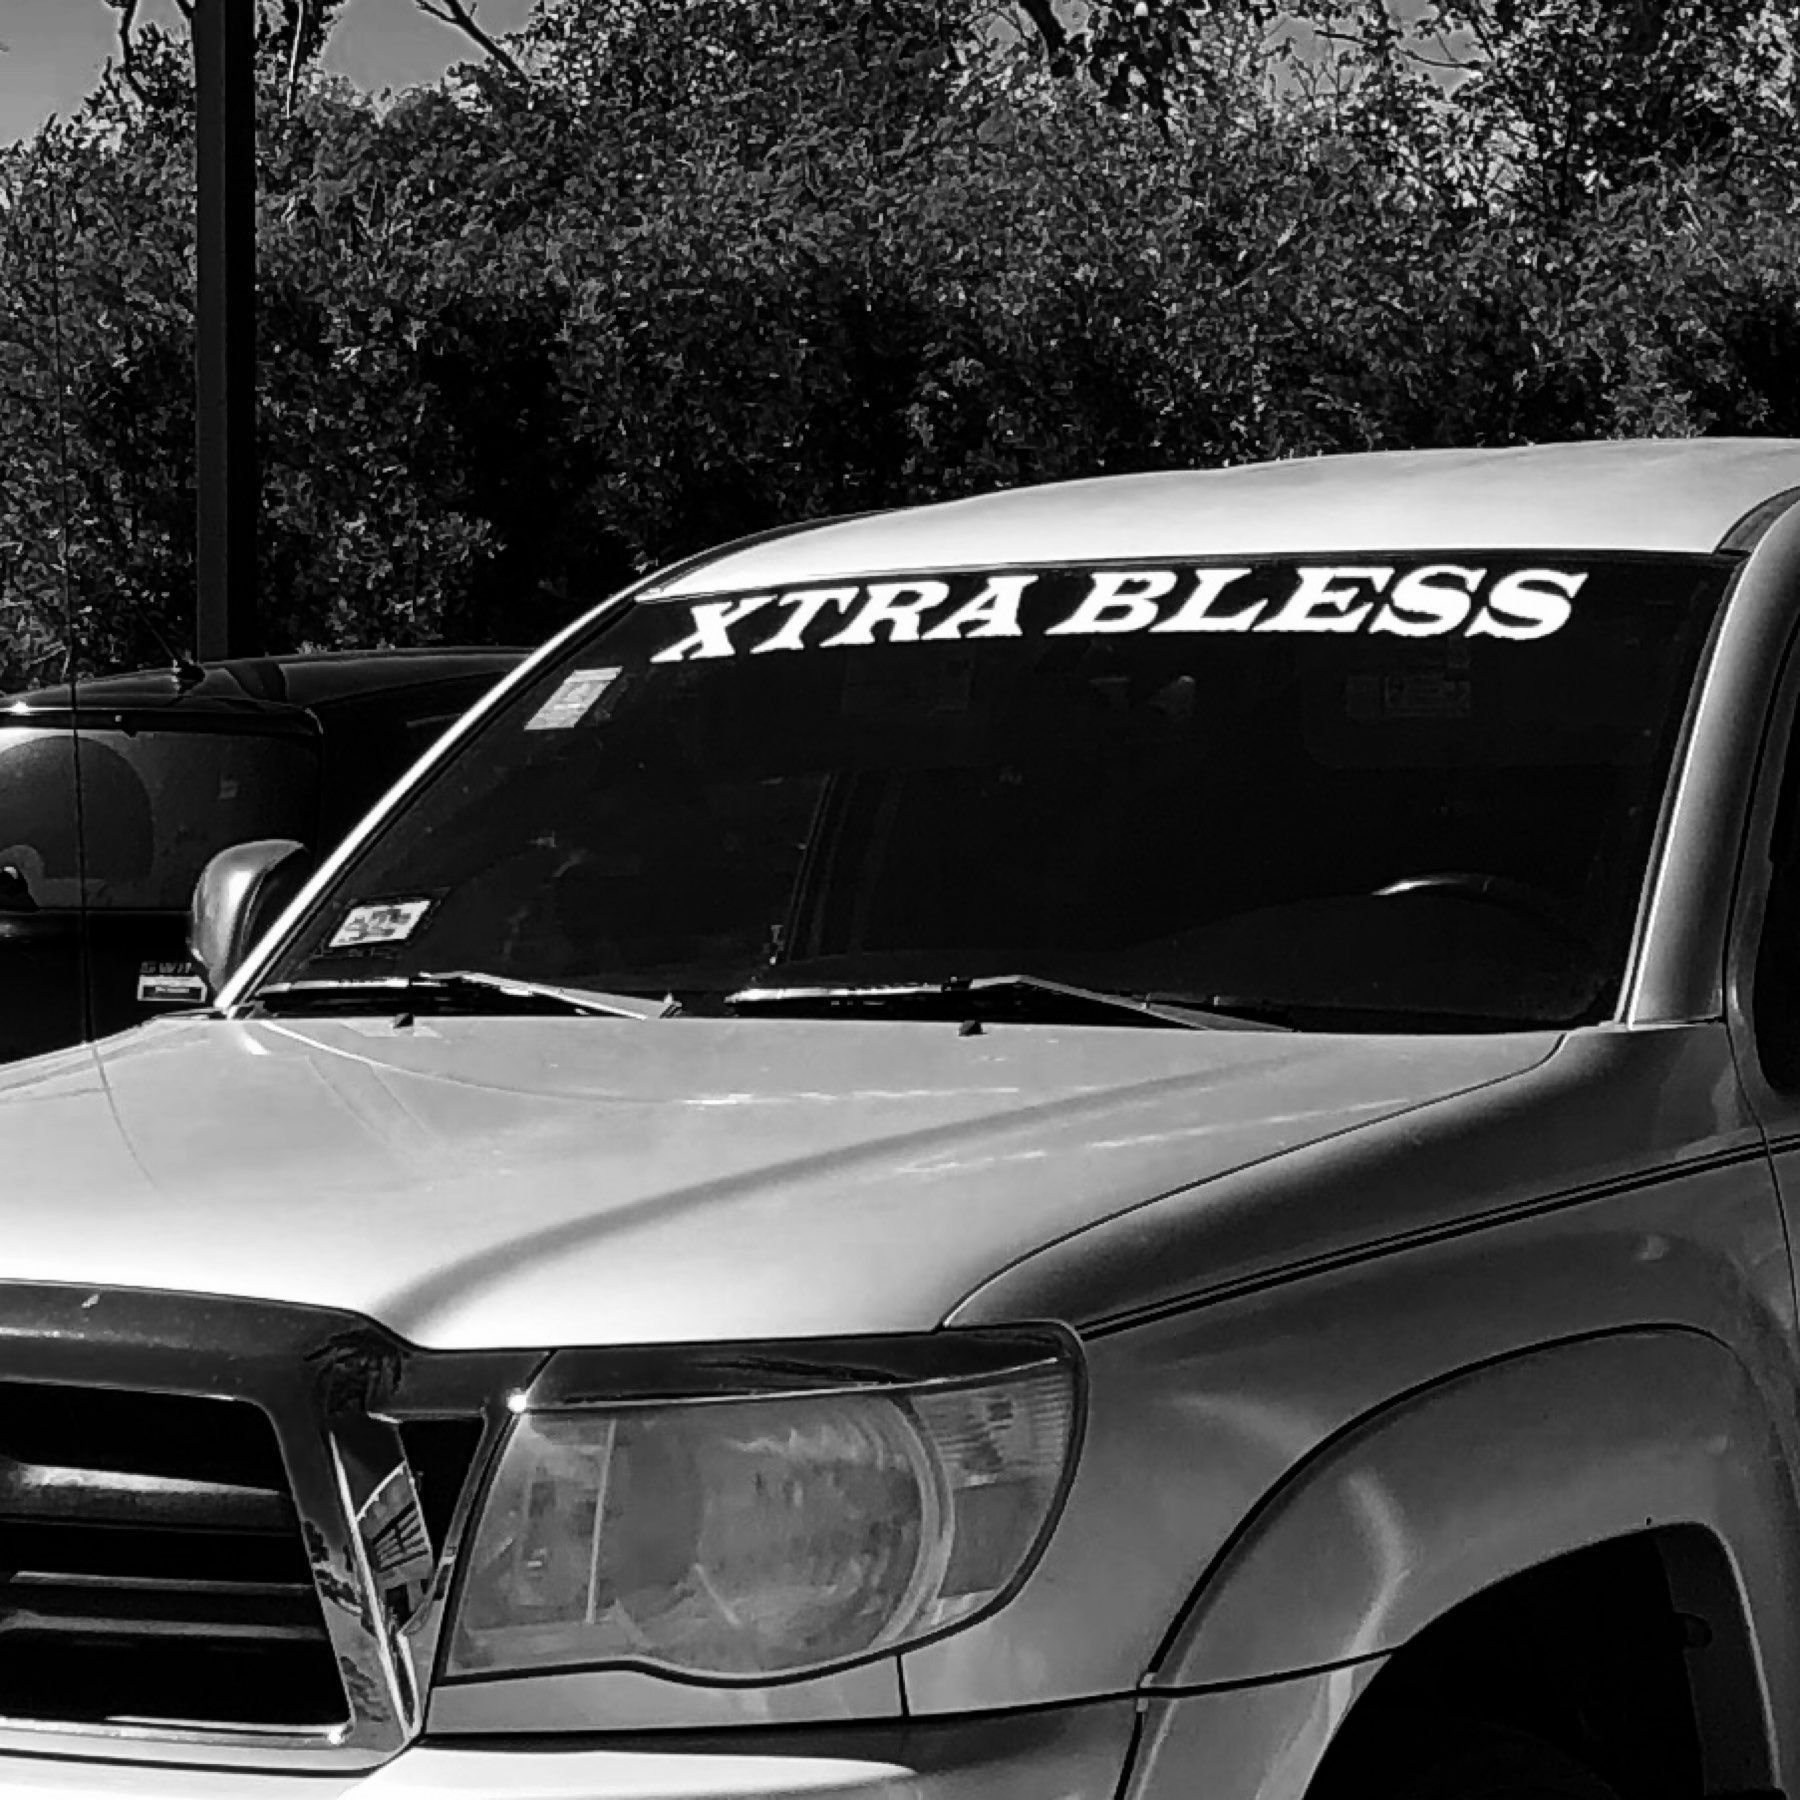 truck with xtra bless decal